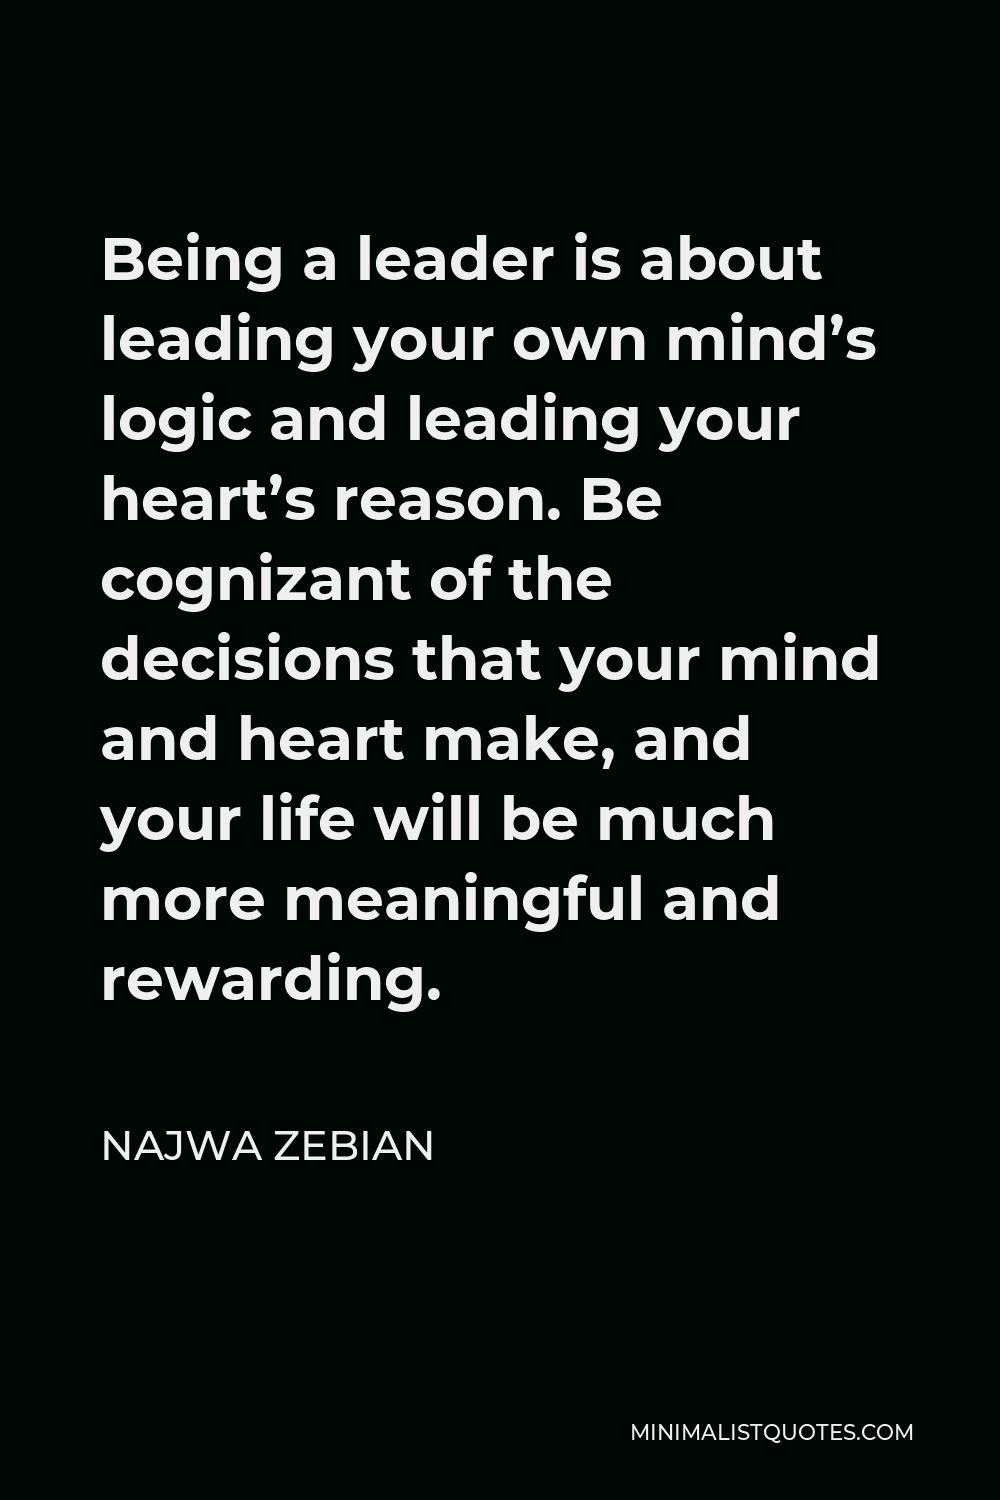 Najwa Zebian Quote - Being a leader is about leading your own mind’s logic and leading your heart’s reason. Be cognizant of the decisions that your mind and heart make, and your life will be much more meaningful and rewarding.